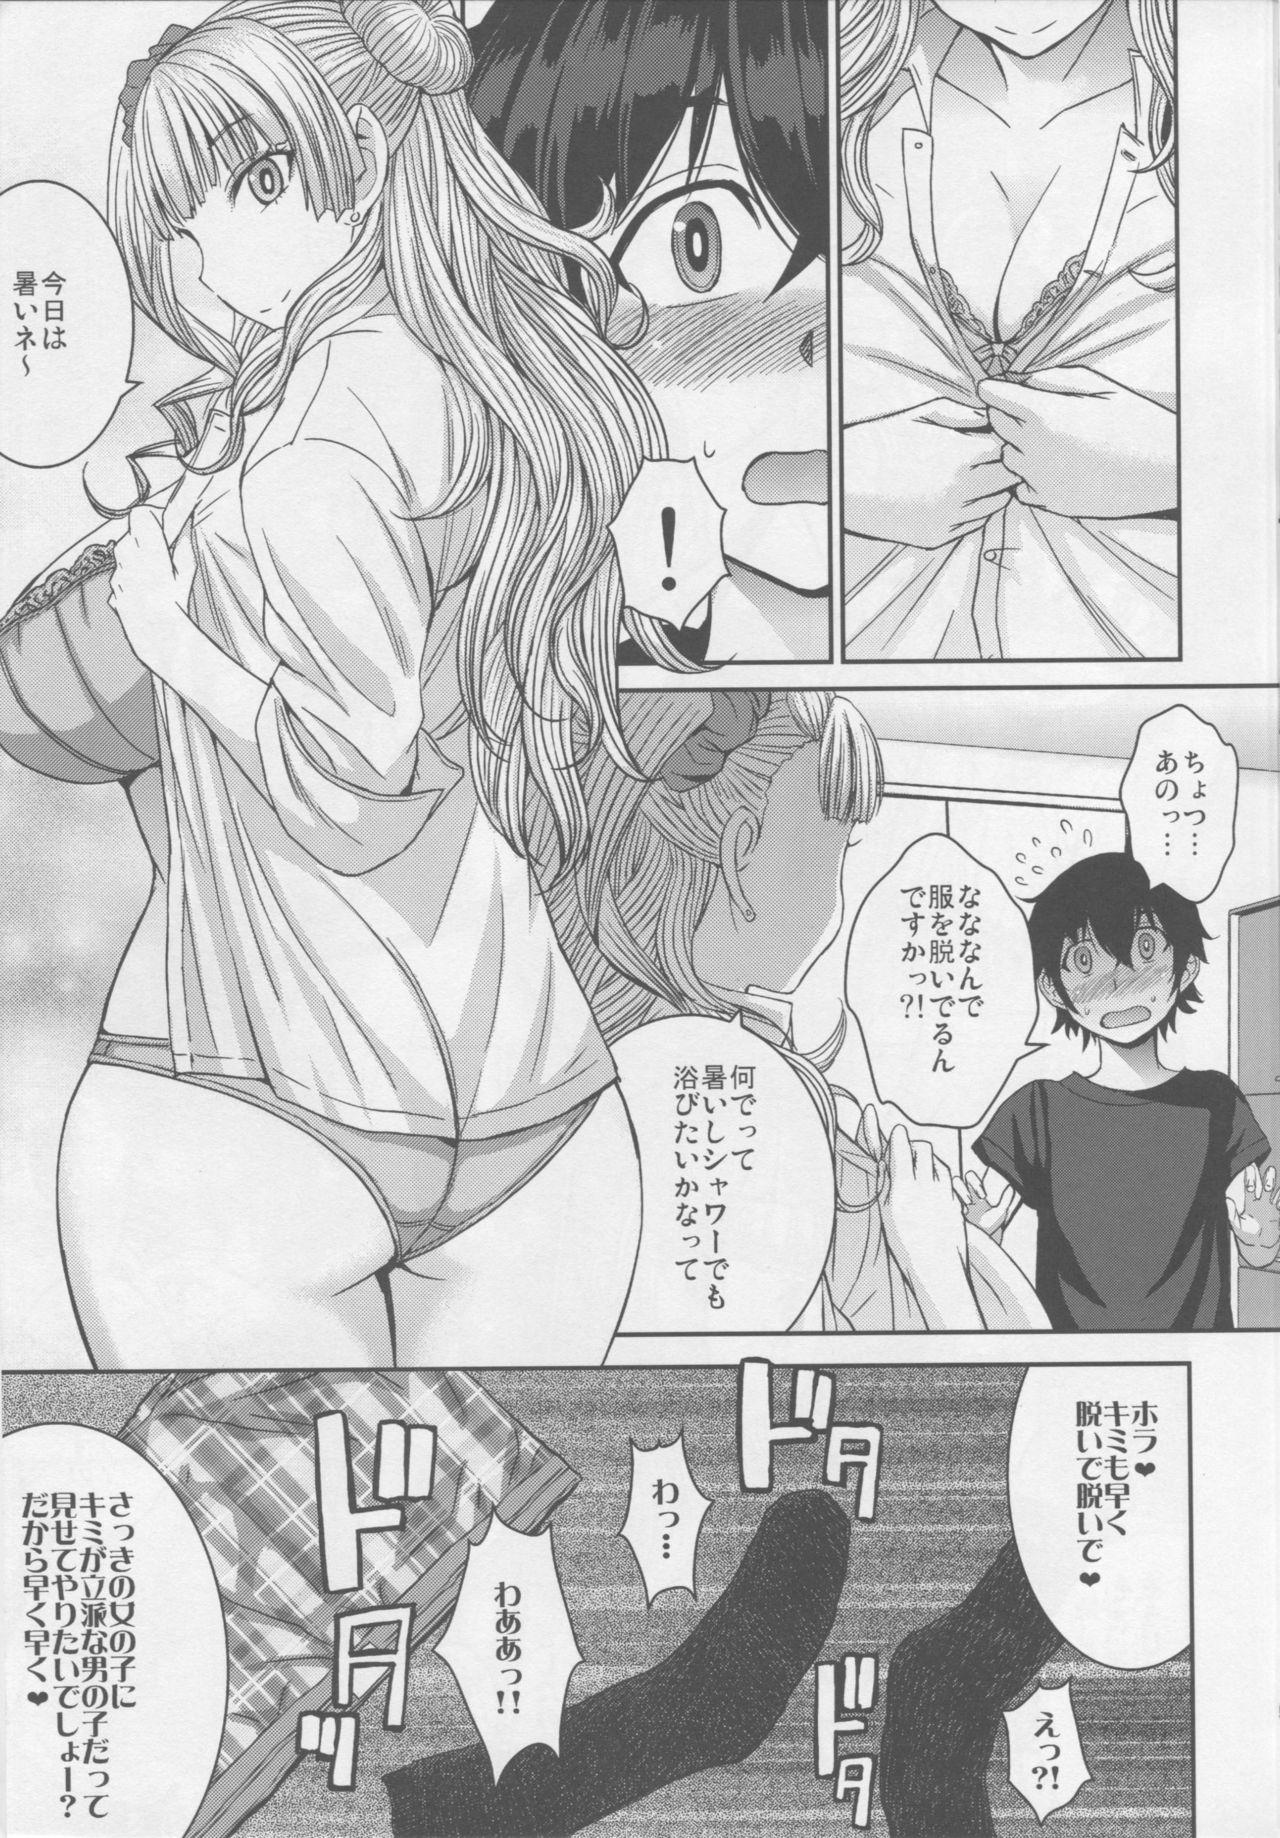 Gays Boy Meets Gal - Oshiete galko-chan Grosso - Page 6